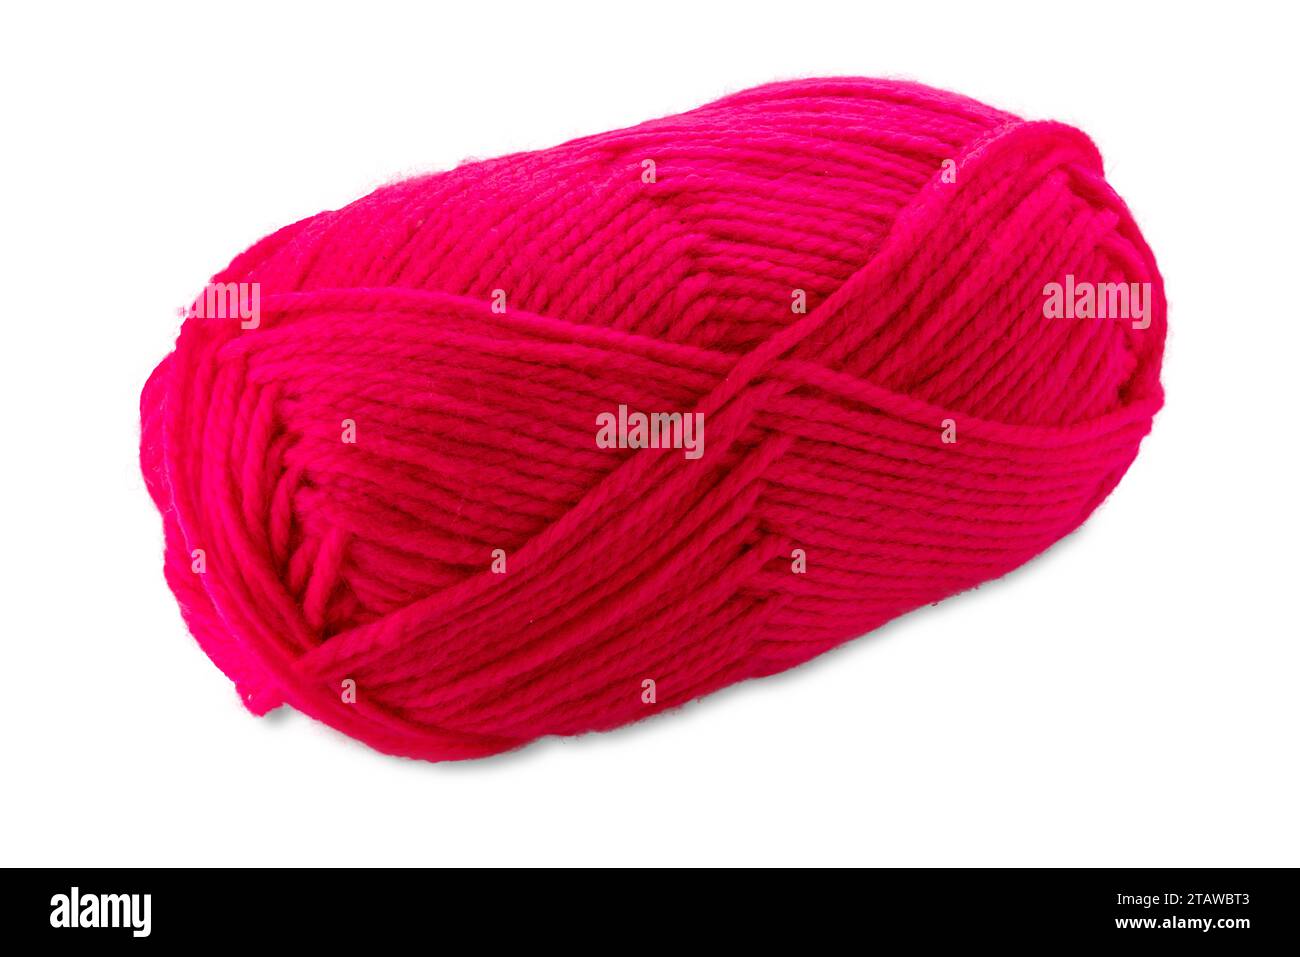 Ball of fuchsia-colored wool yarn isolated on white with clipping path included Stock Photo